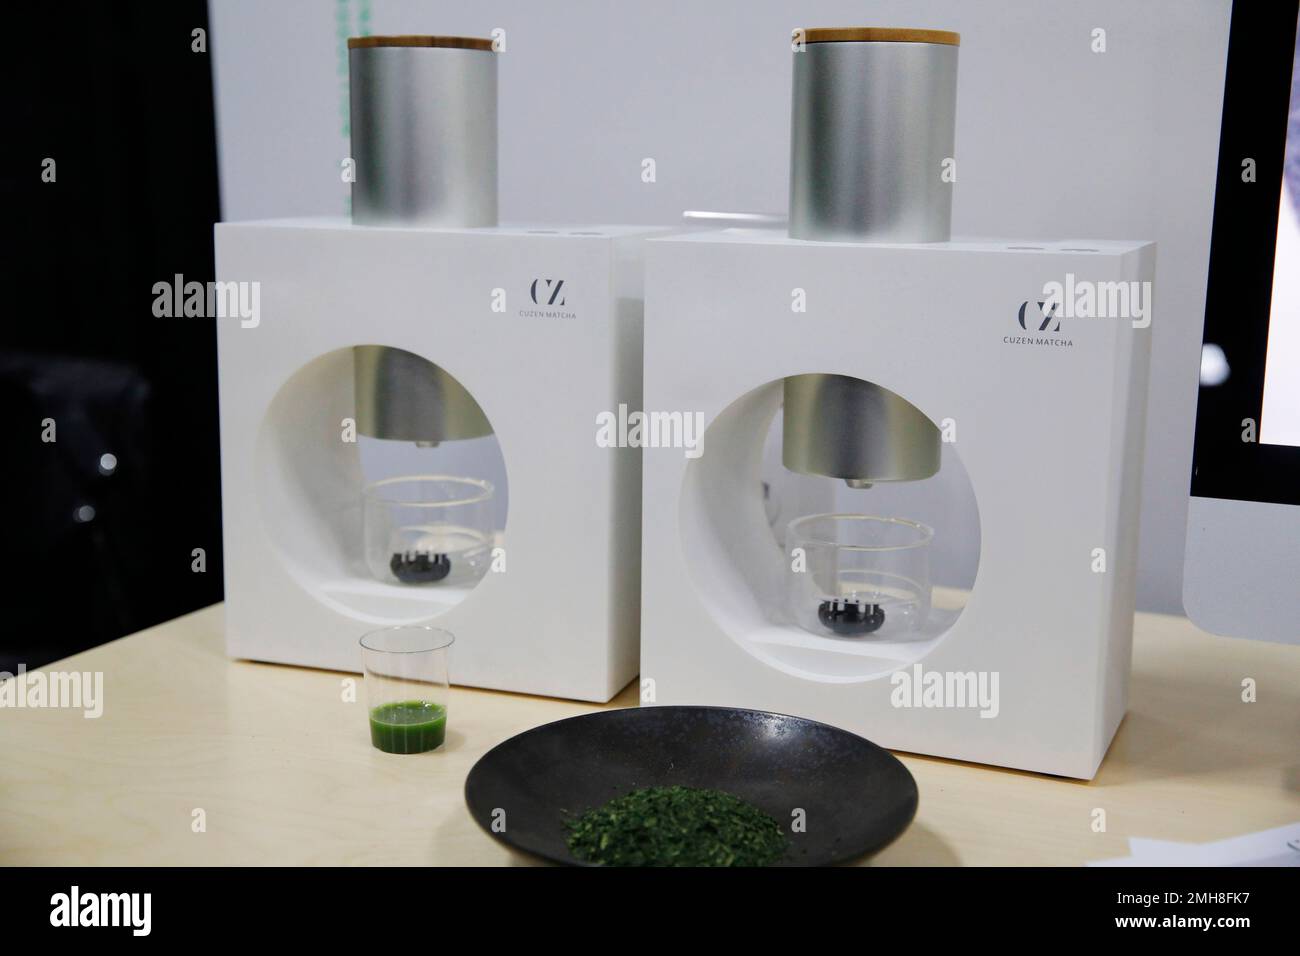 The Cuzen Matcha Maker, an automatic matcha maker, appears on display at  the Cuzen Matcha booth during CES Unveiled before CES International,  Sunday, Jan. 5, 2020, in Las Vegas. (AP Photo/John Locher